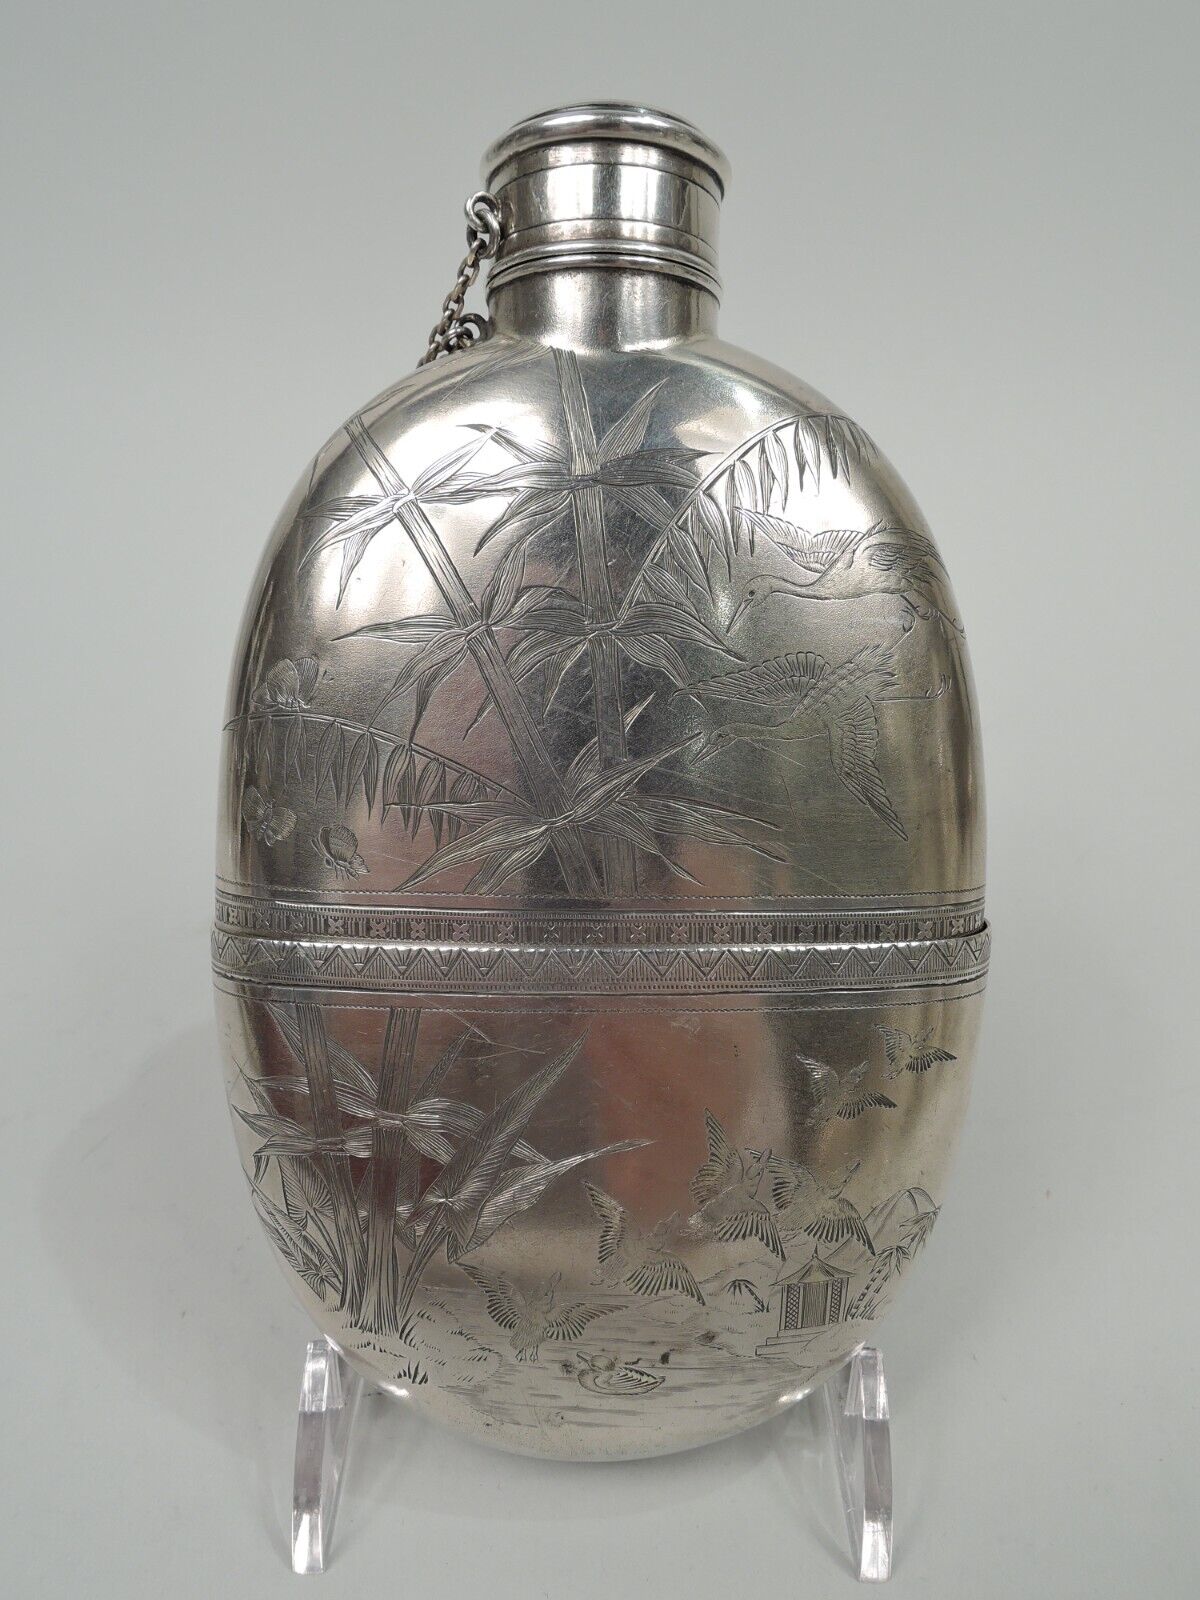 Gorham Flask 20 Antique Aesthetic Japonesque American Sterling Silver 1878